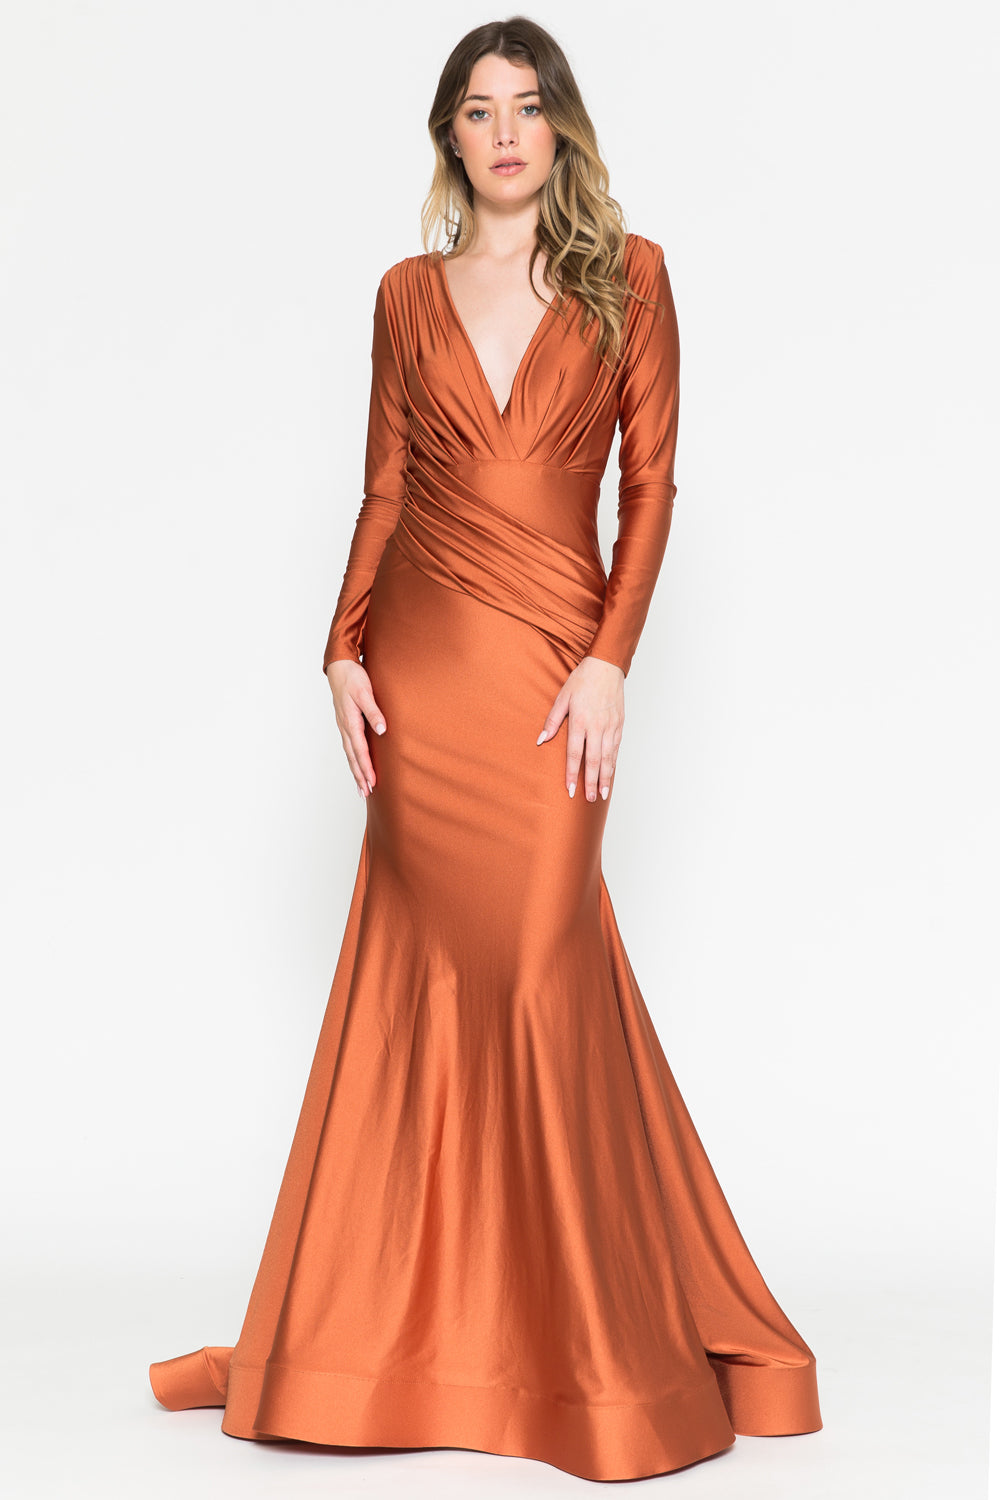 Gorgeous satin gown with double lining - long sleeve with open back and open bodice. Back zipper, long sleeves. Ruching around the waist.  Features:  Stretch Jersey, Satin Fabric Ruching Around Waist  Back Zipper, Hidden  Low V-Front and Back Long Sleeves   Horse netting on bottom  Long Train